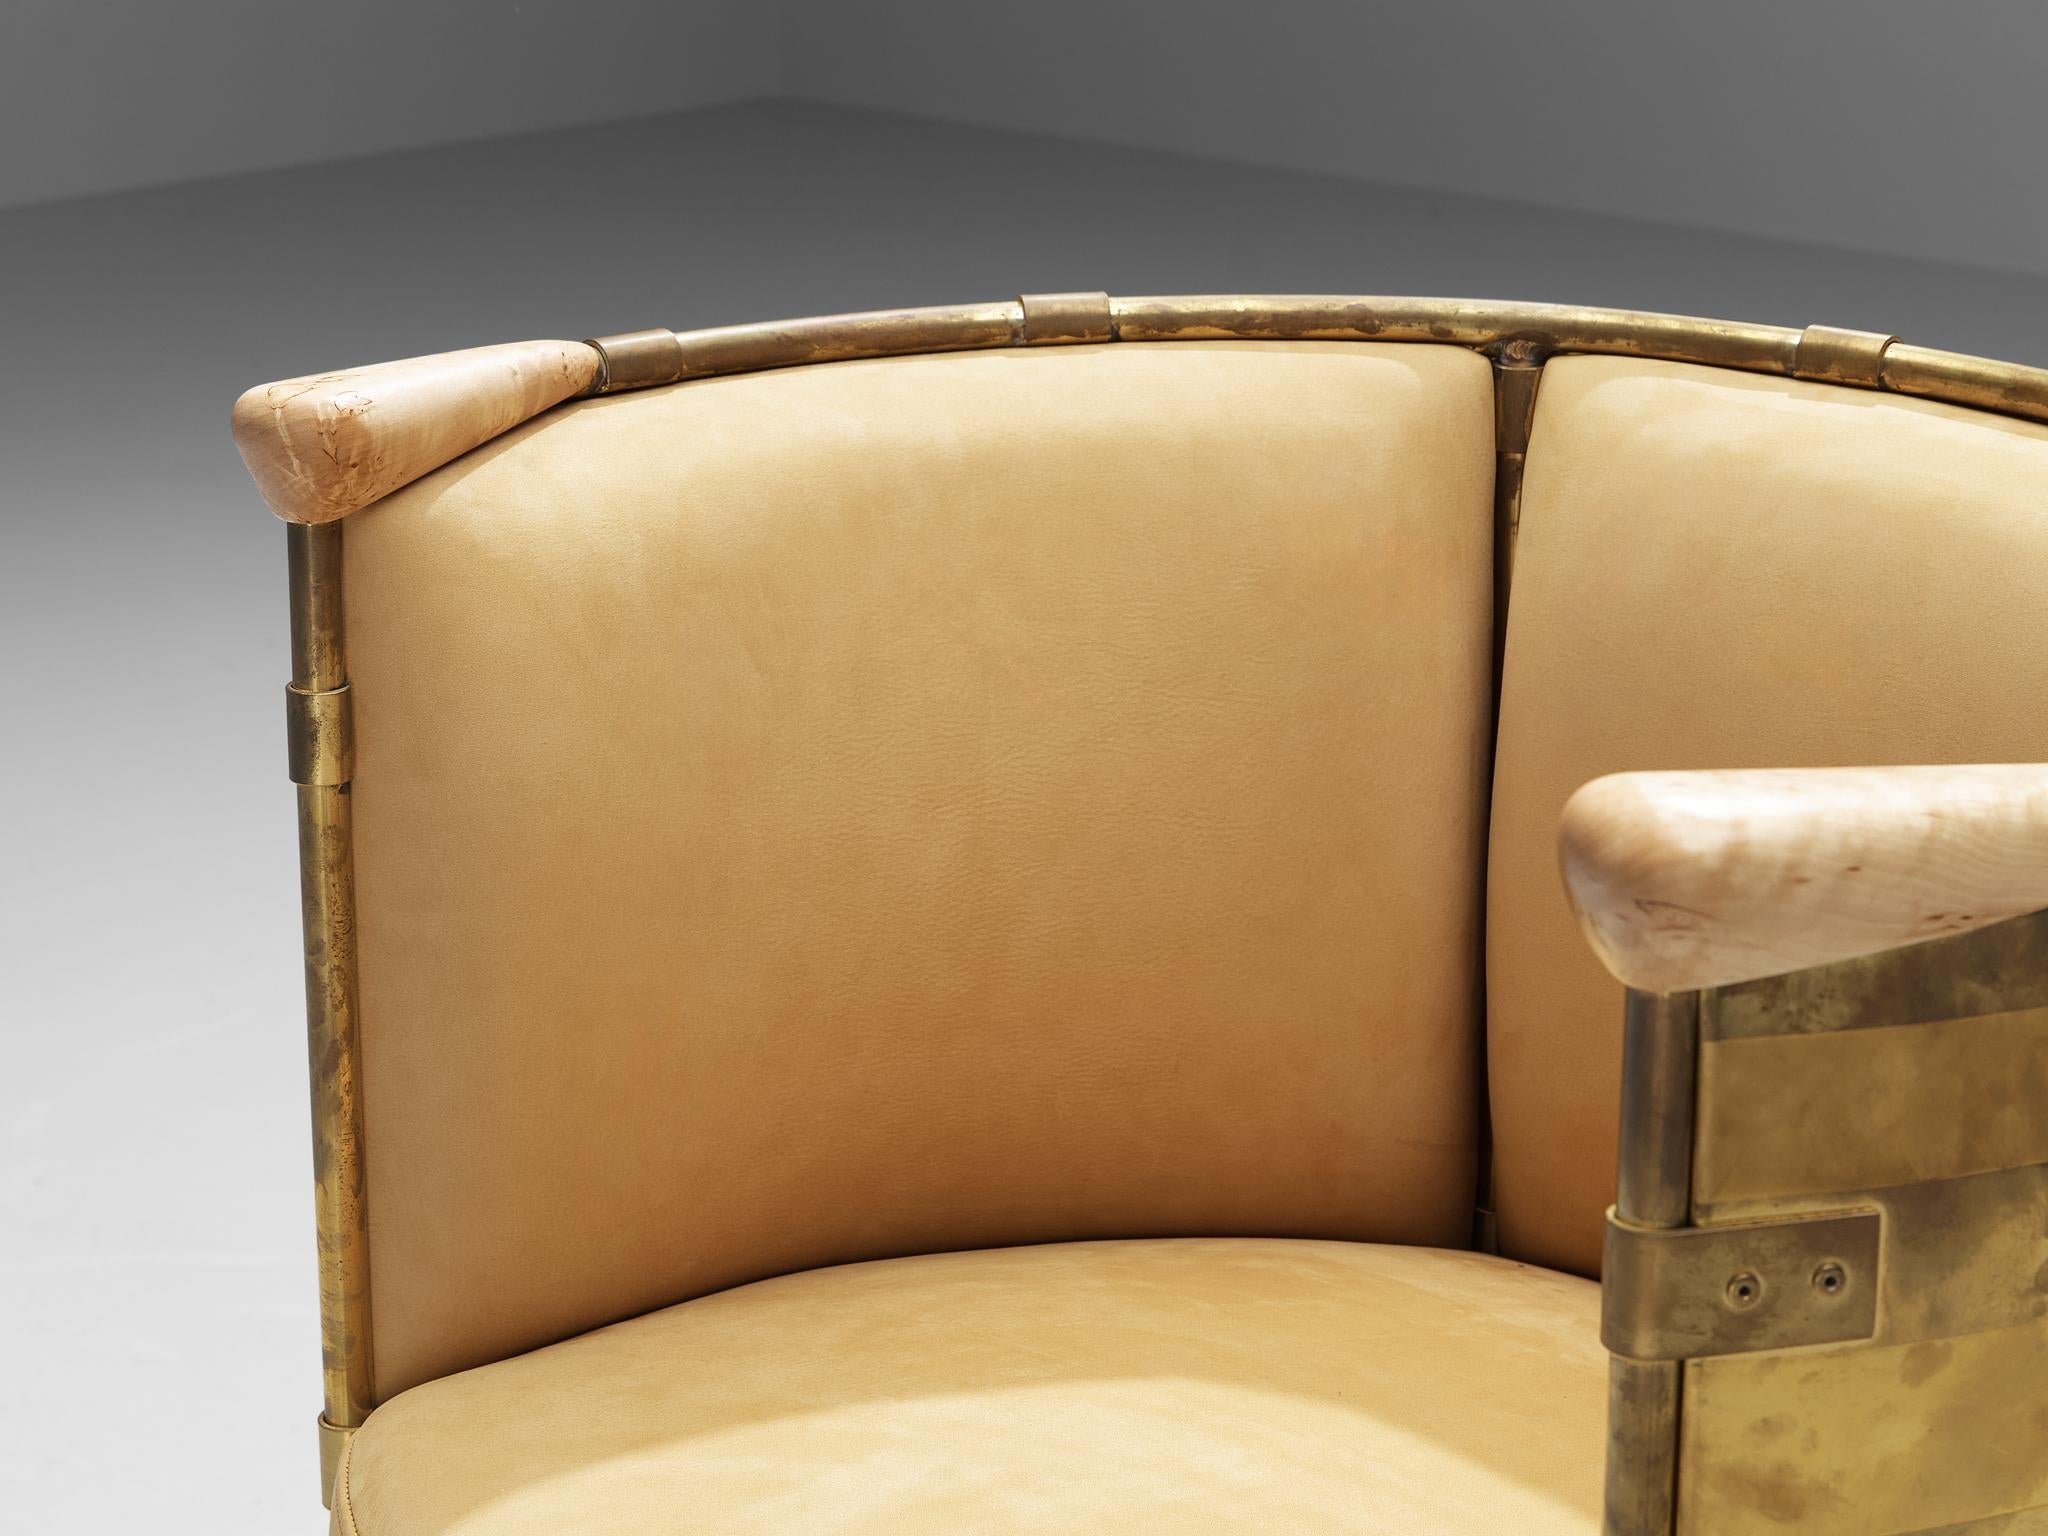 Mats Theselius for Källemo AB Limited Edition Lounge Chairs 'El Dorado'